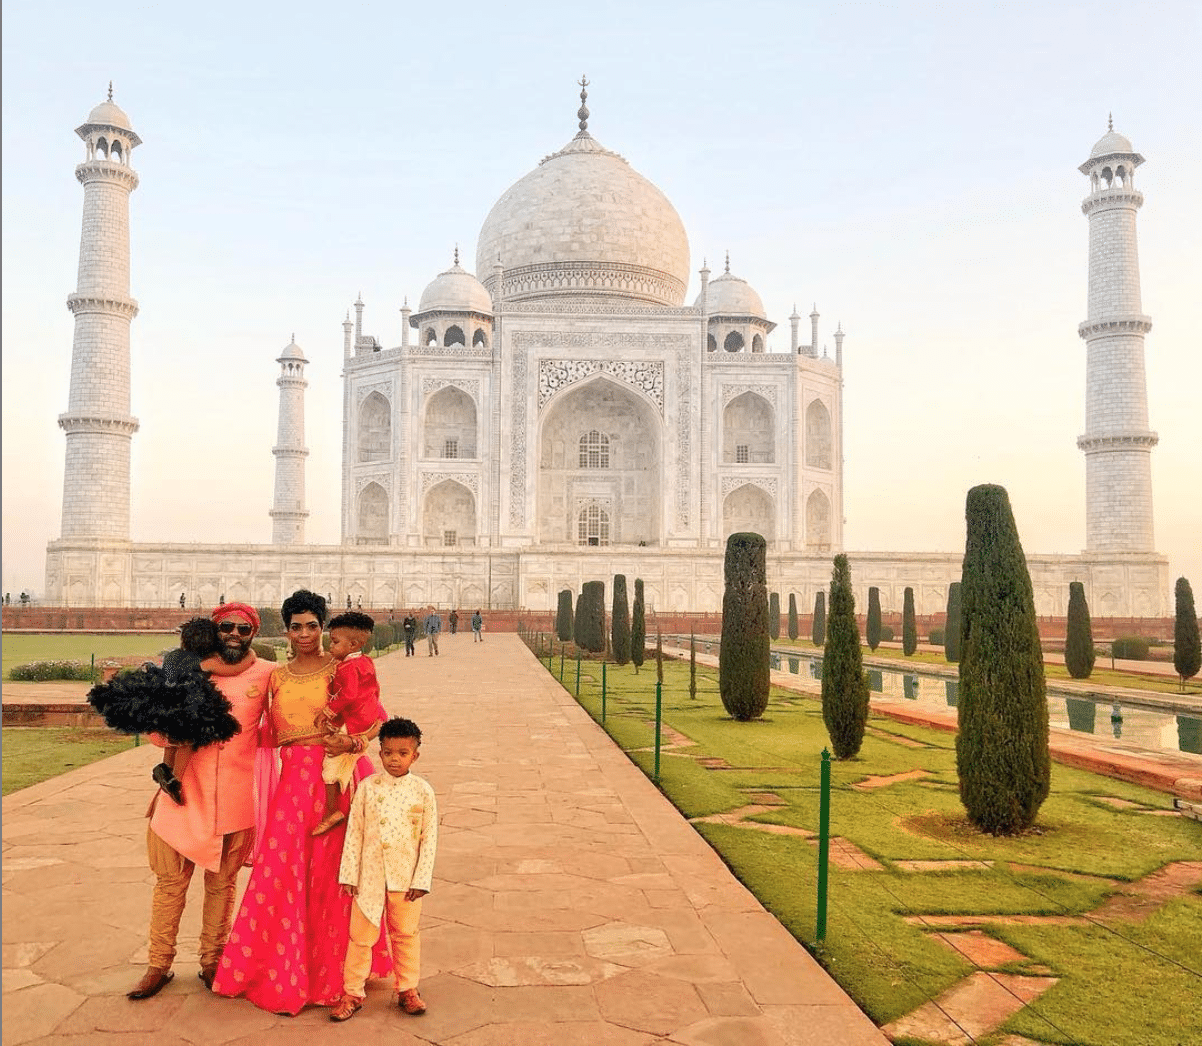 Black Travel Moment of the Day: We Love This Sweet Family Photo Opp At The Taj Mahal